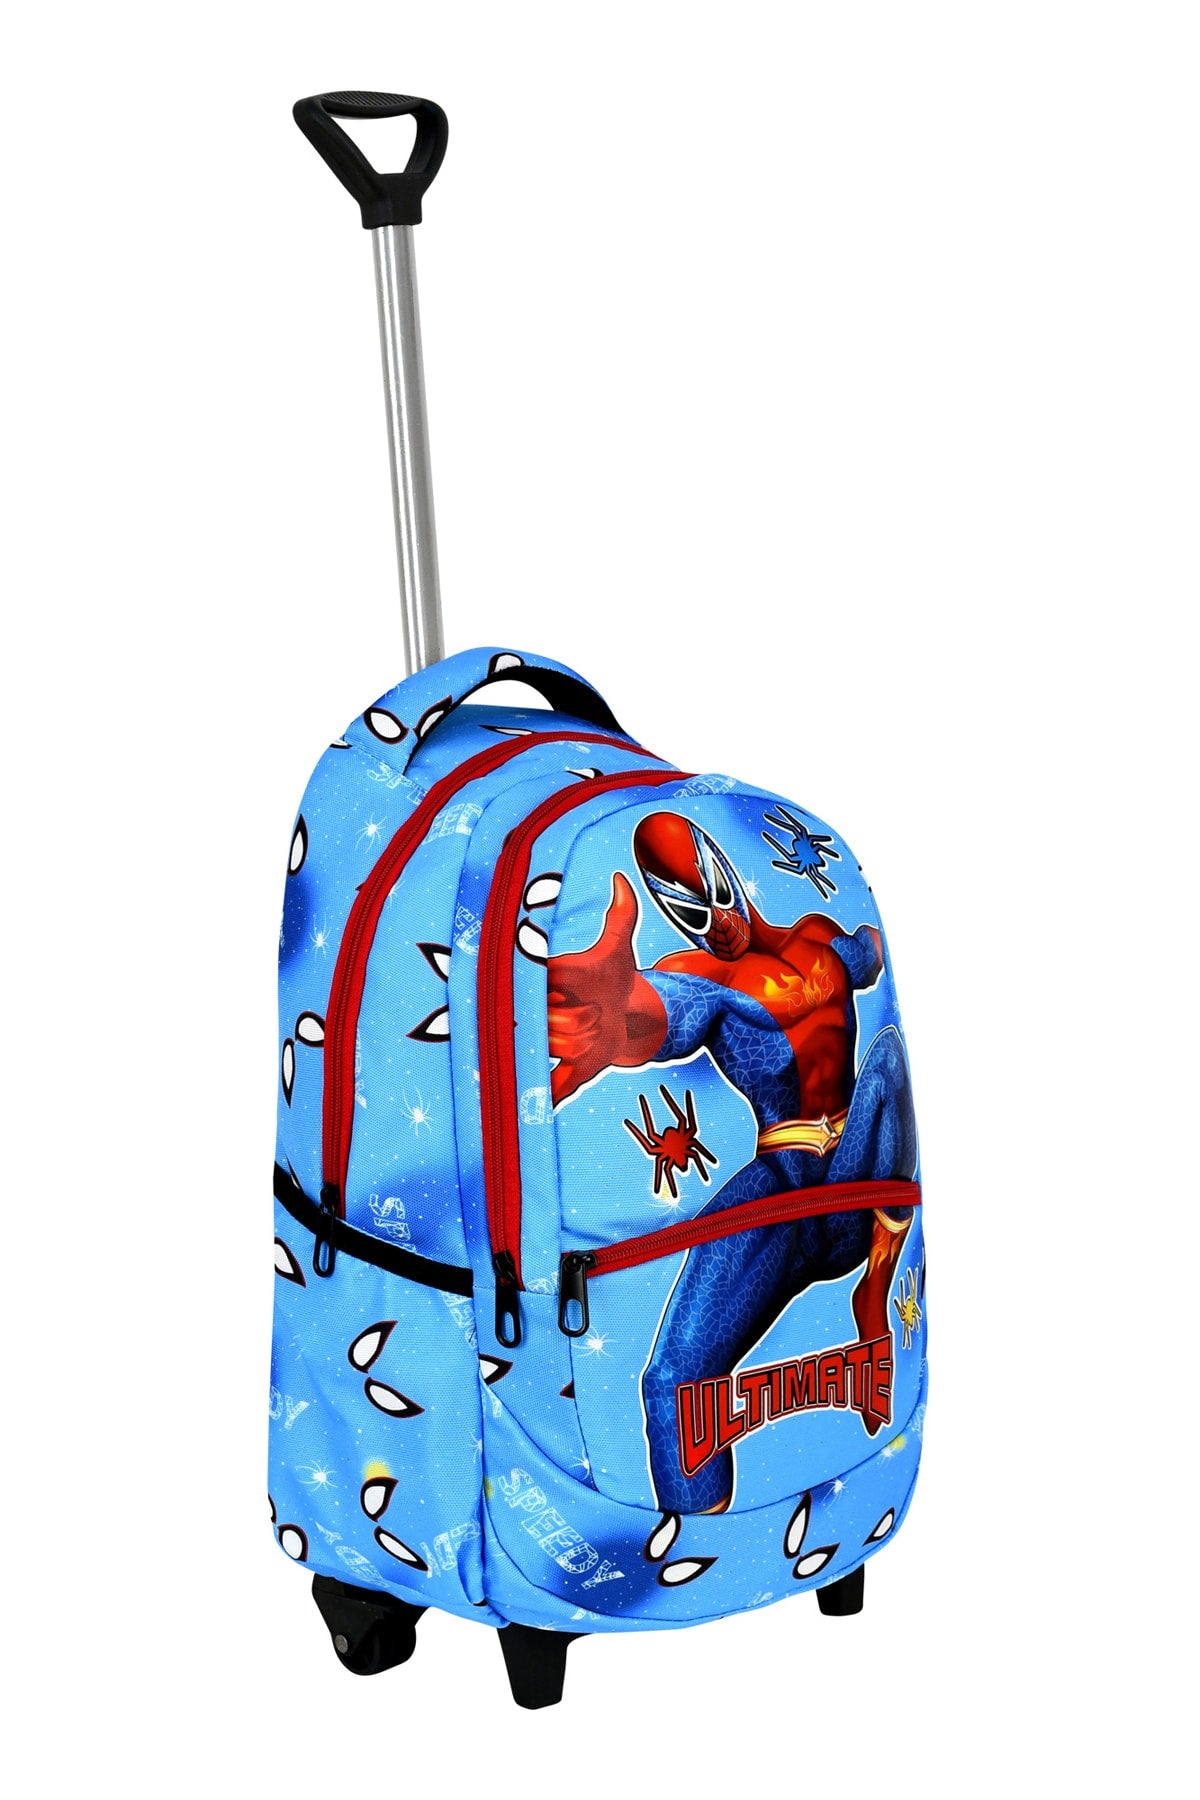 3 Pcs School Set with Squeegee, Spiderman Pattern Primary School Bag Lunch Box Pen Holder